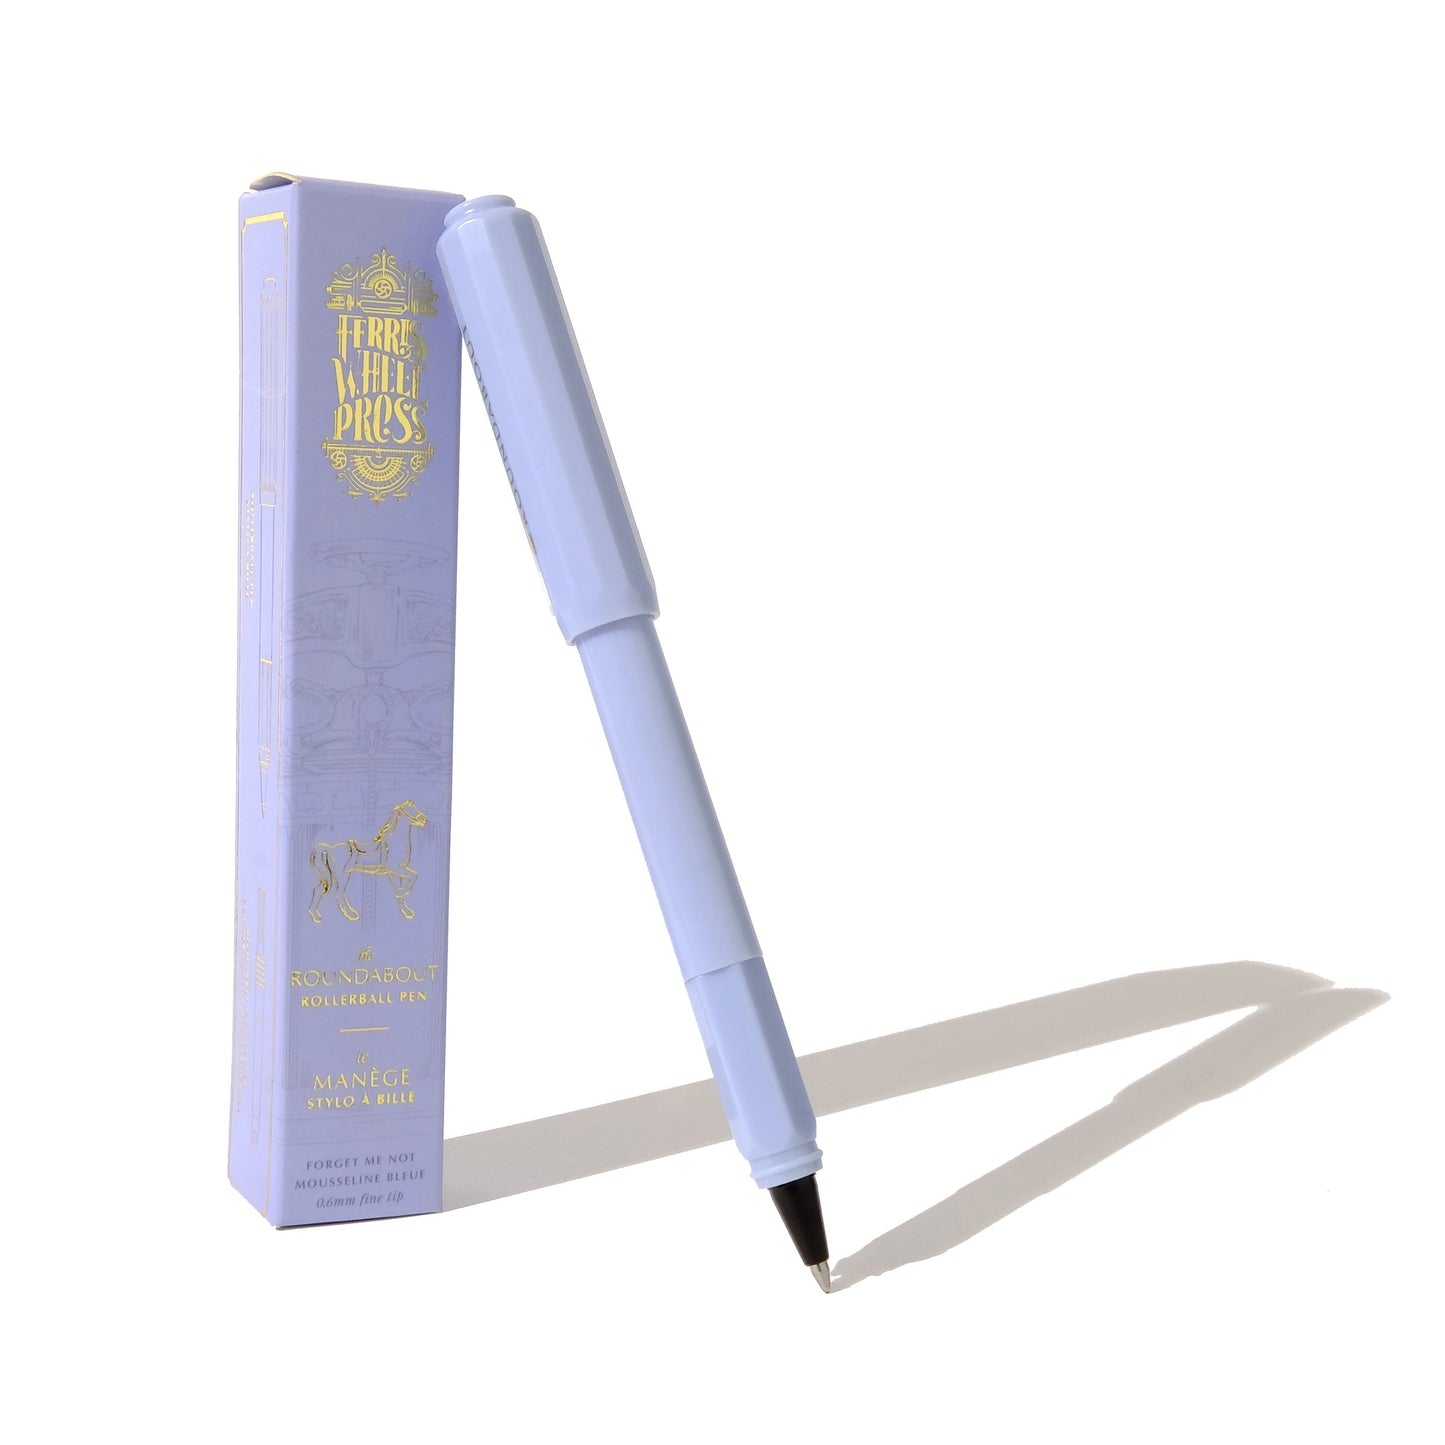 Ferris Wheel Press - Forget Me Not - The Roundabout Rollerball Pen